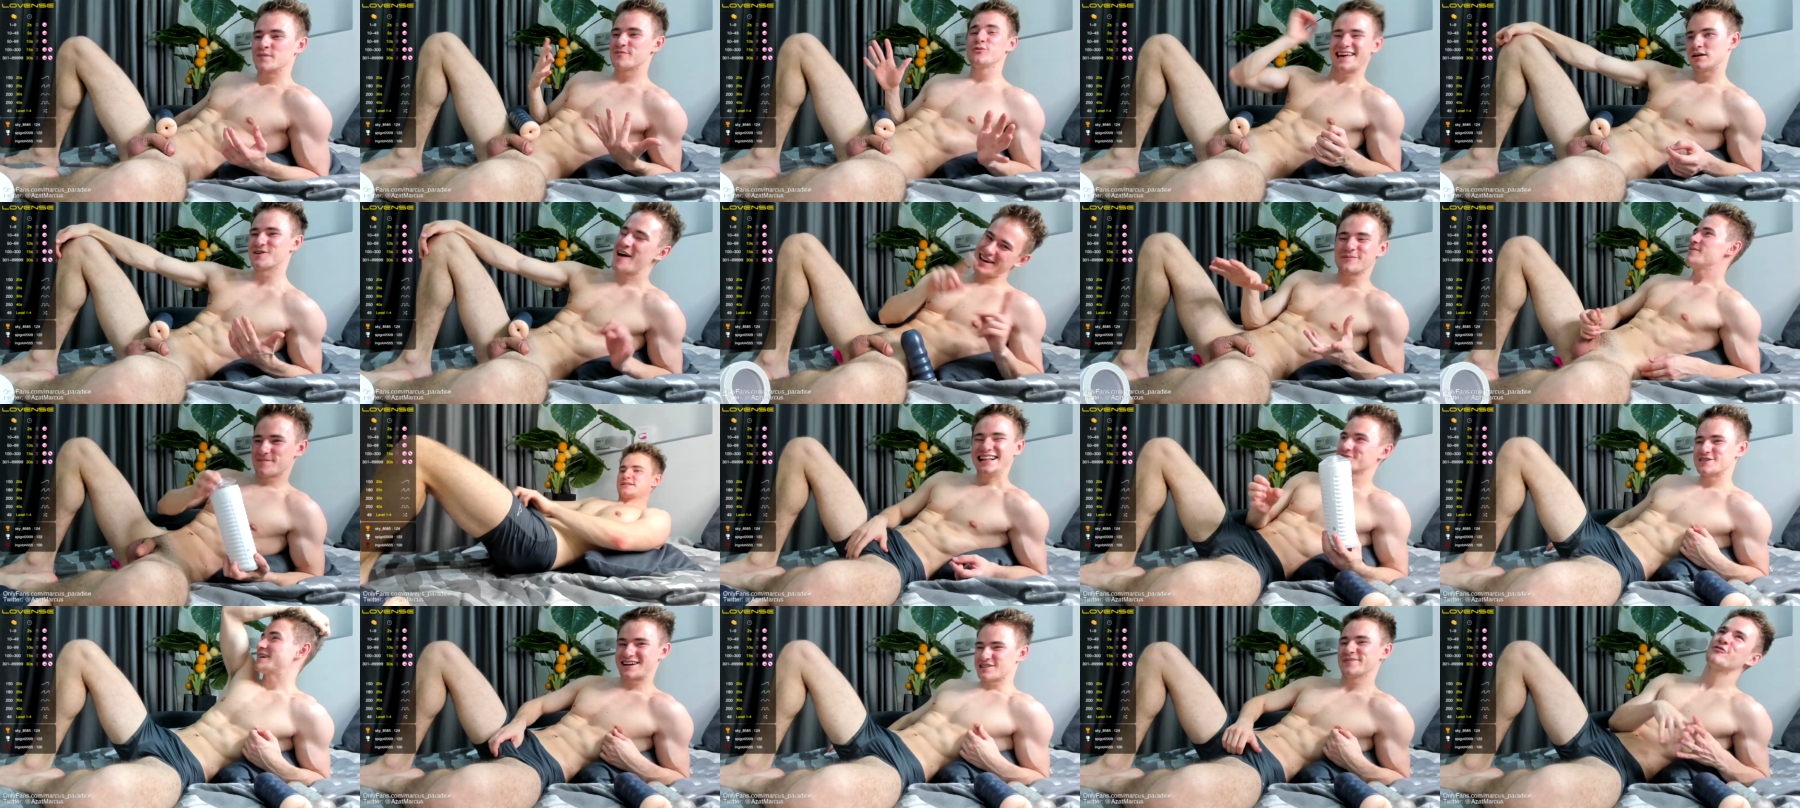 Marcus_Paradise  15-10-2021 Male Topless